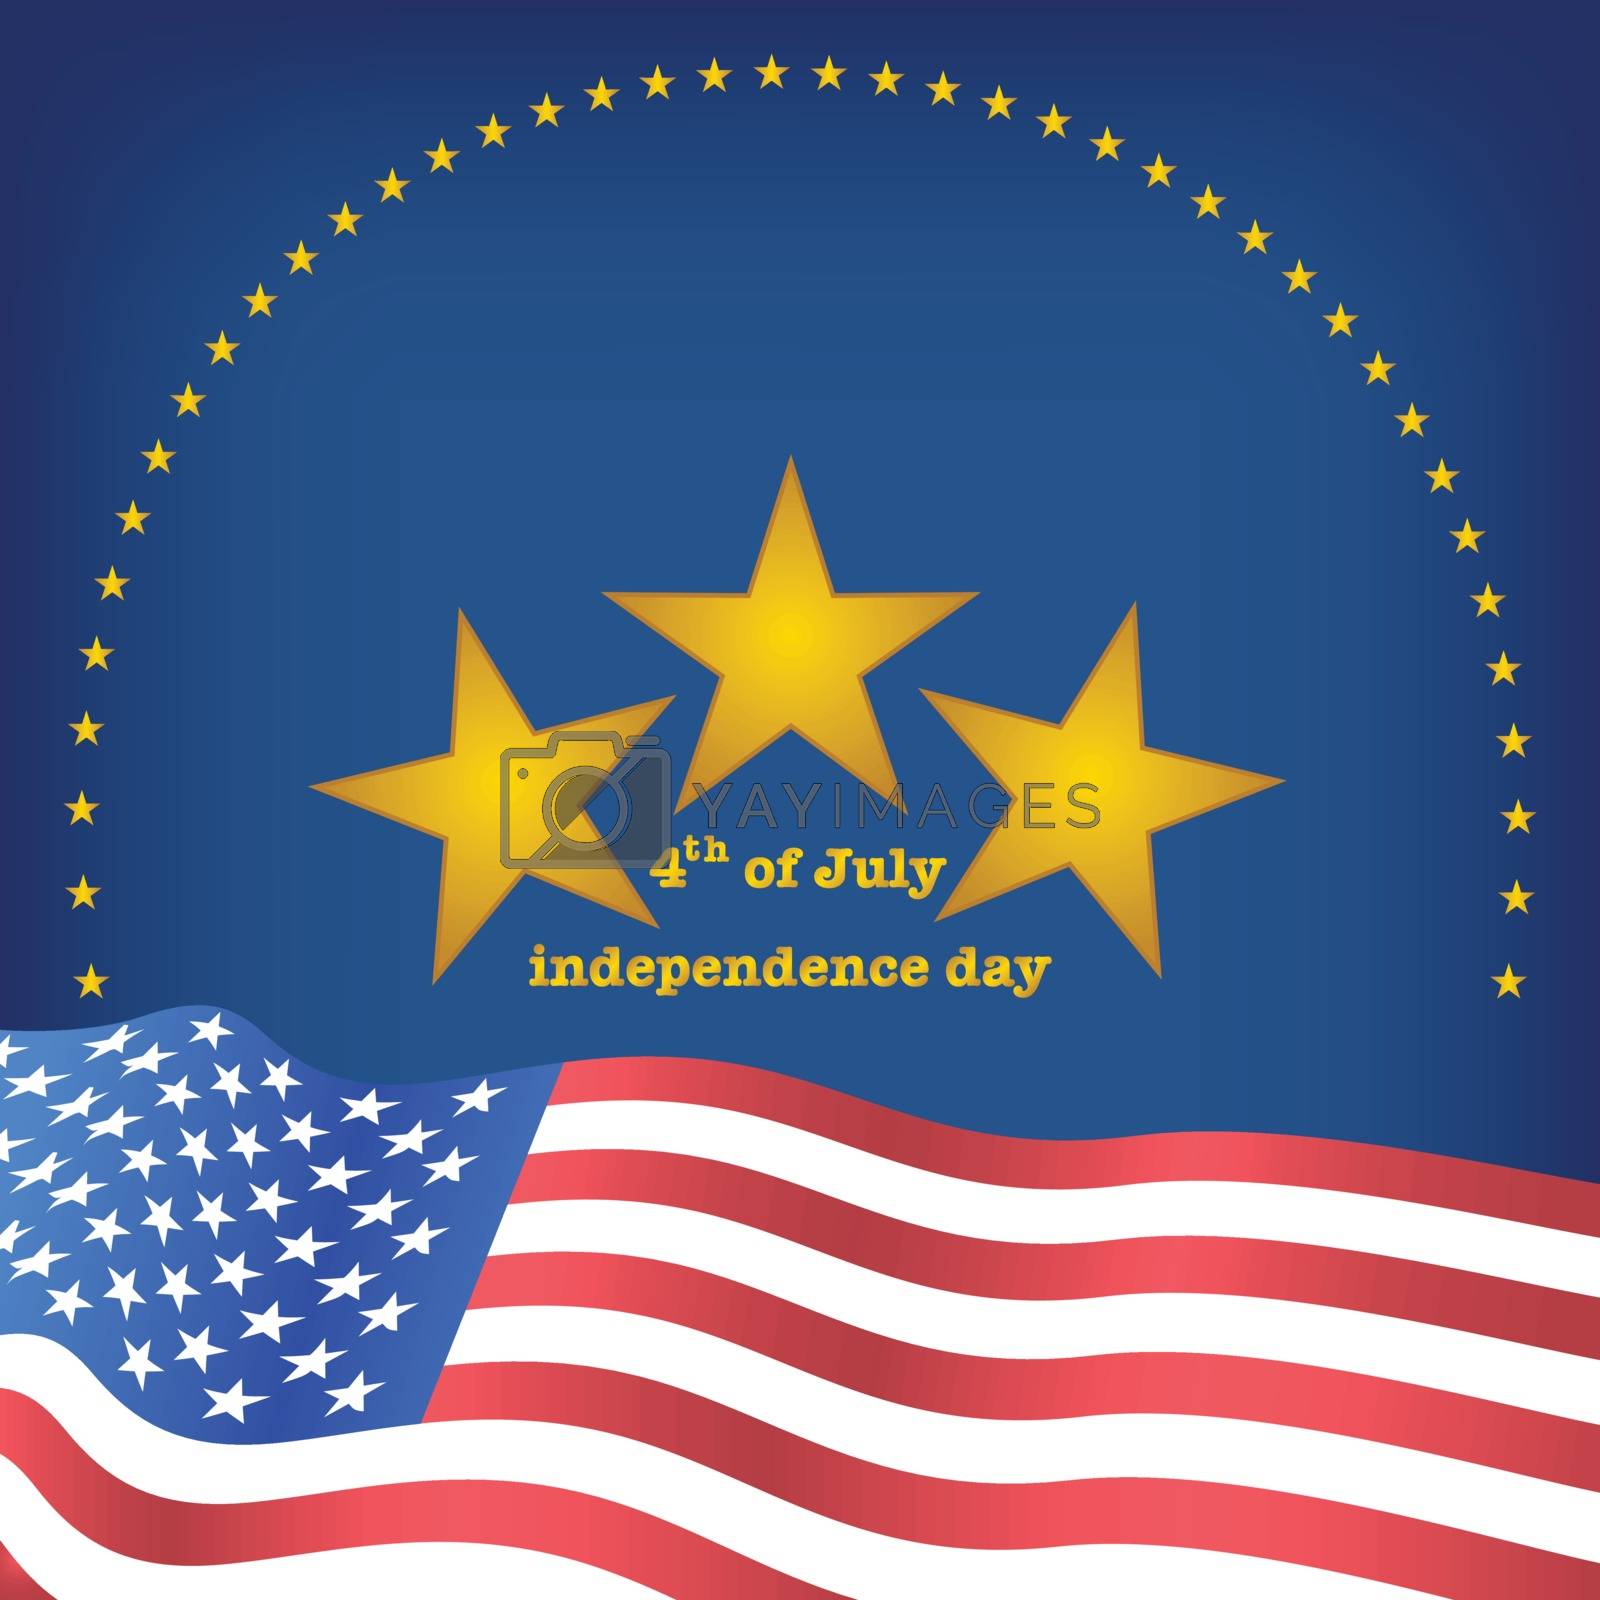 Royalty free image of gold star above wave flag of america by blackbirds